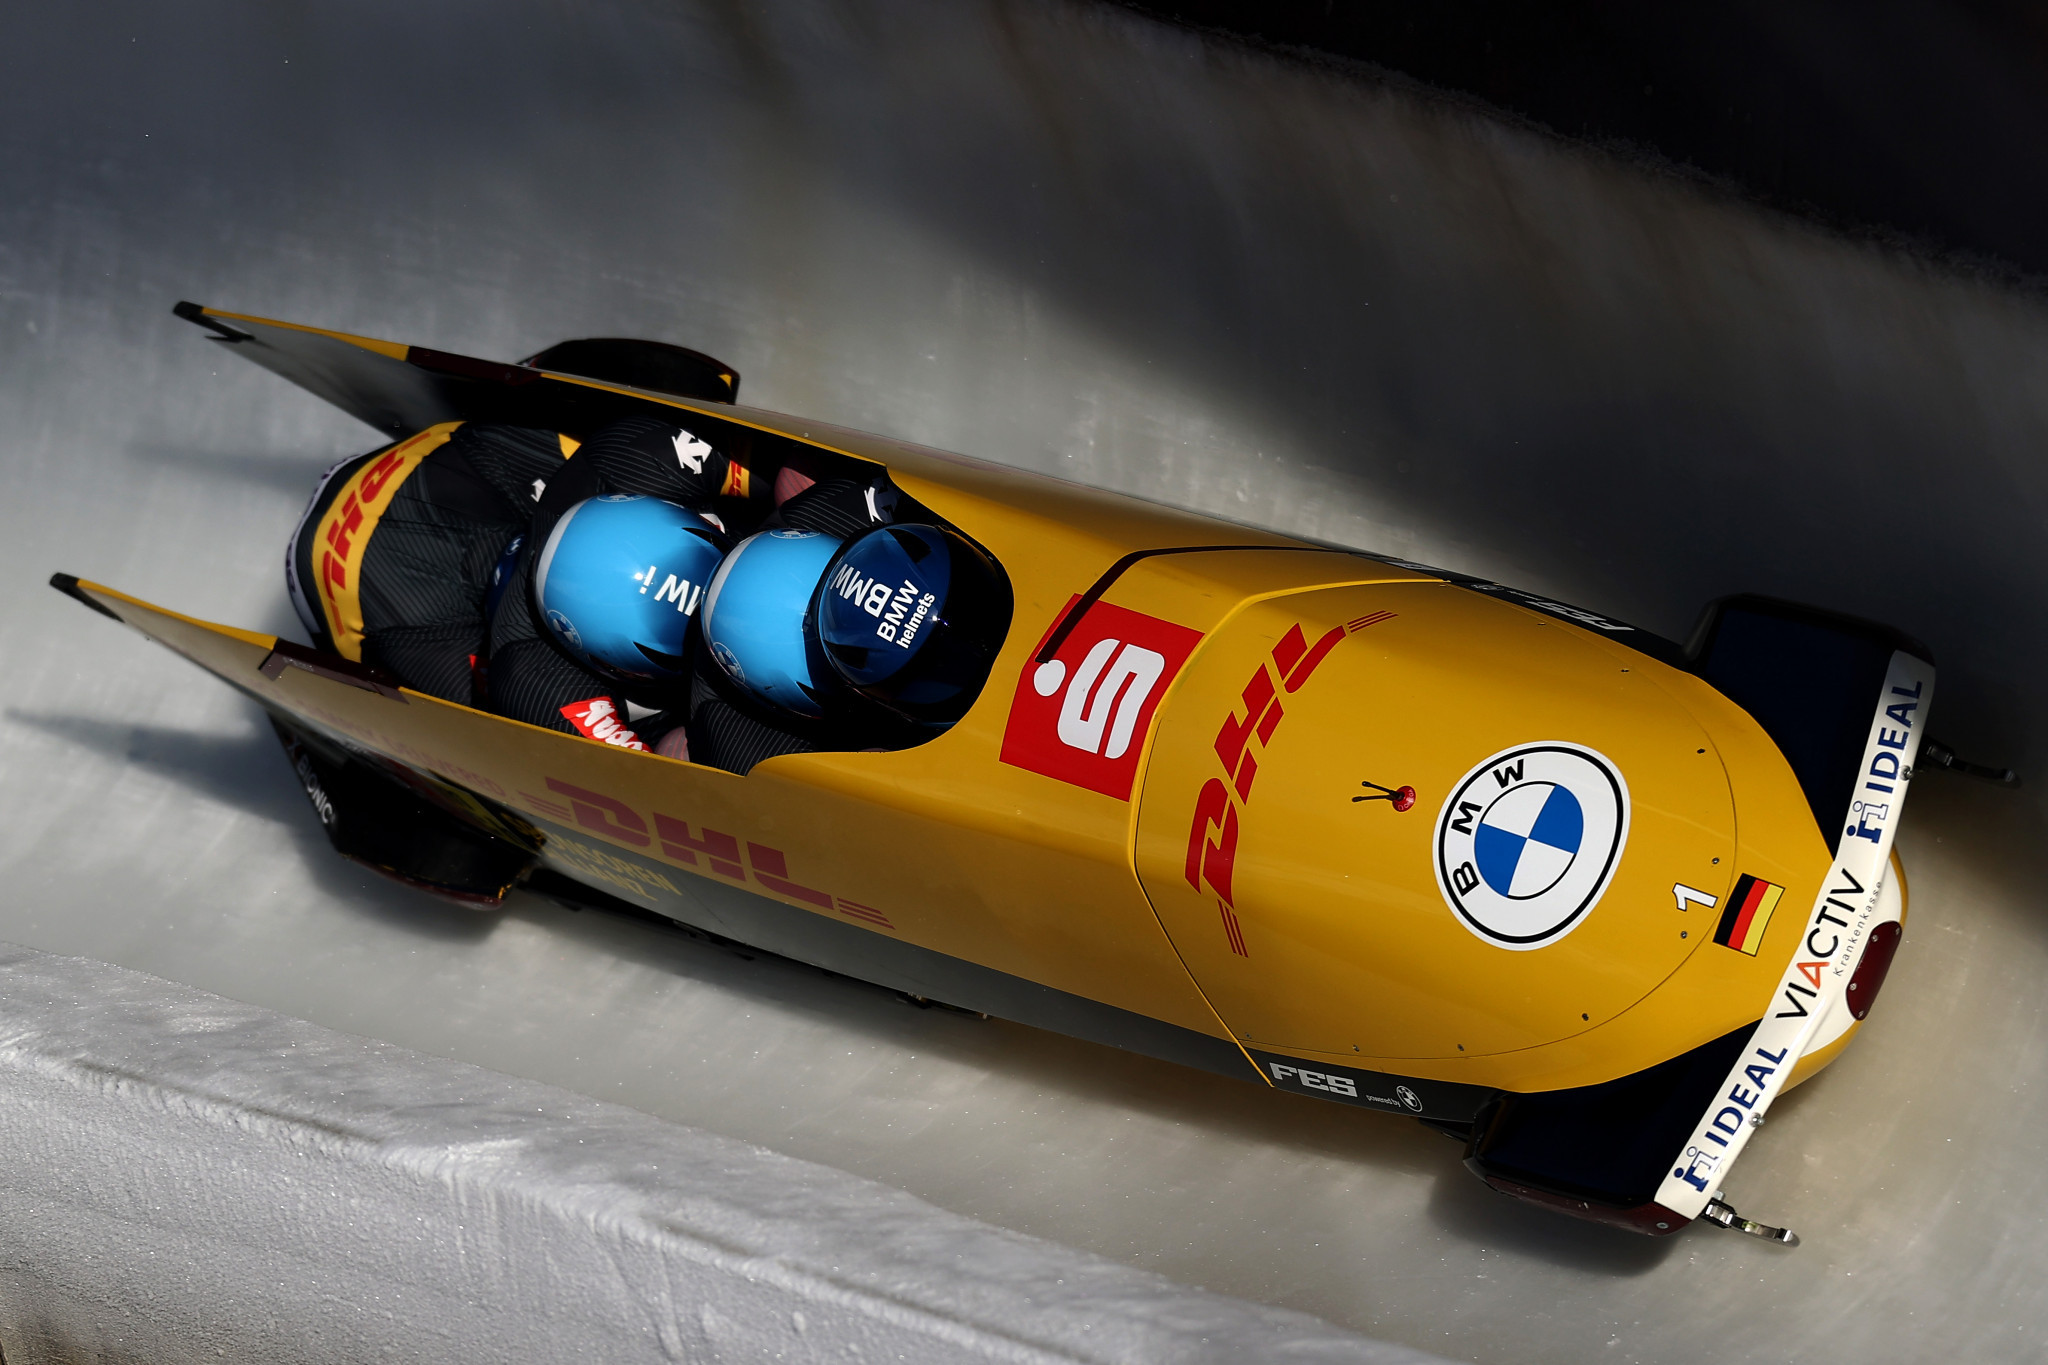 Francesco Friedrich came from behind to win the IBSF World Cup four-man bobsleigh in Winterberg ©Getty Images